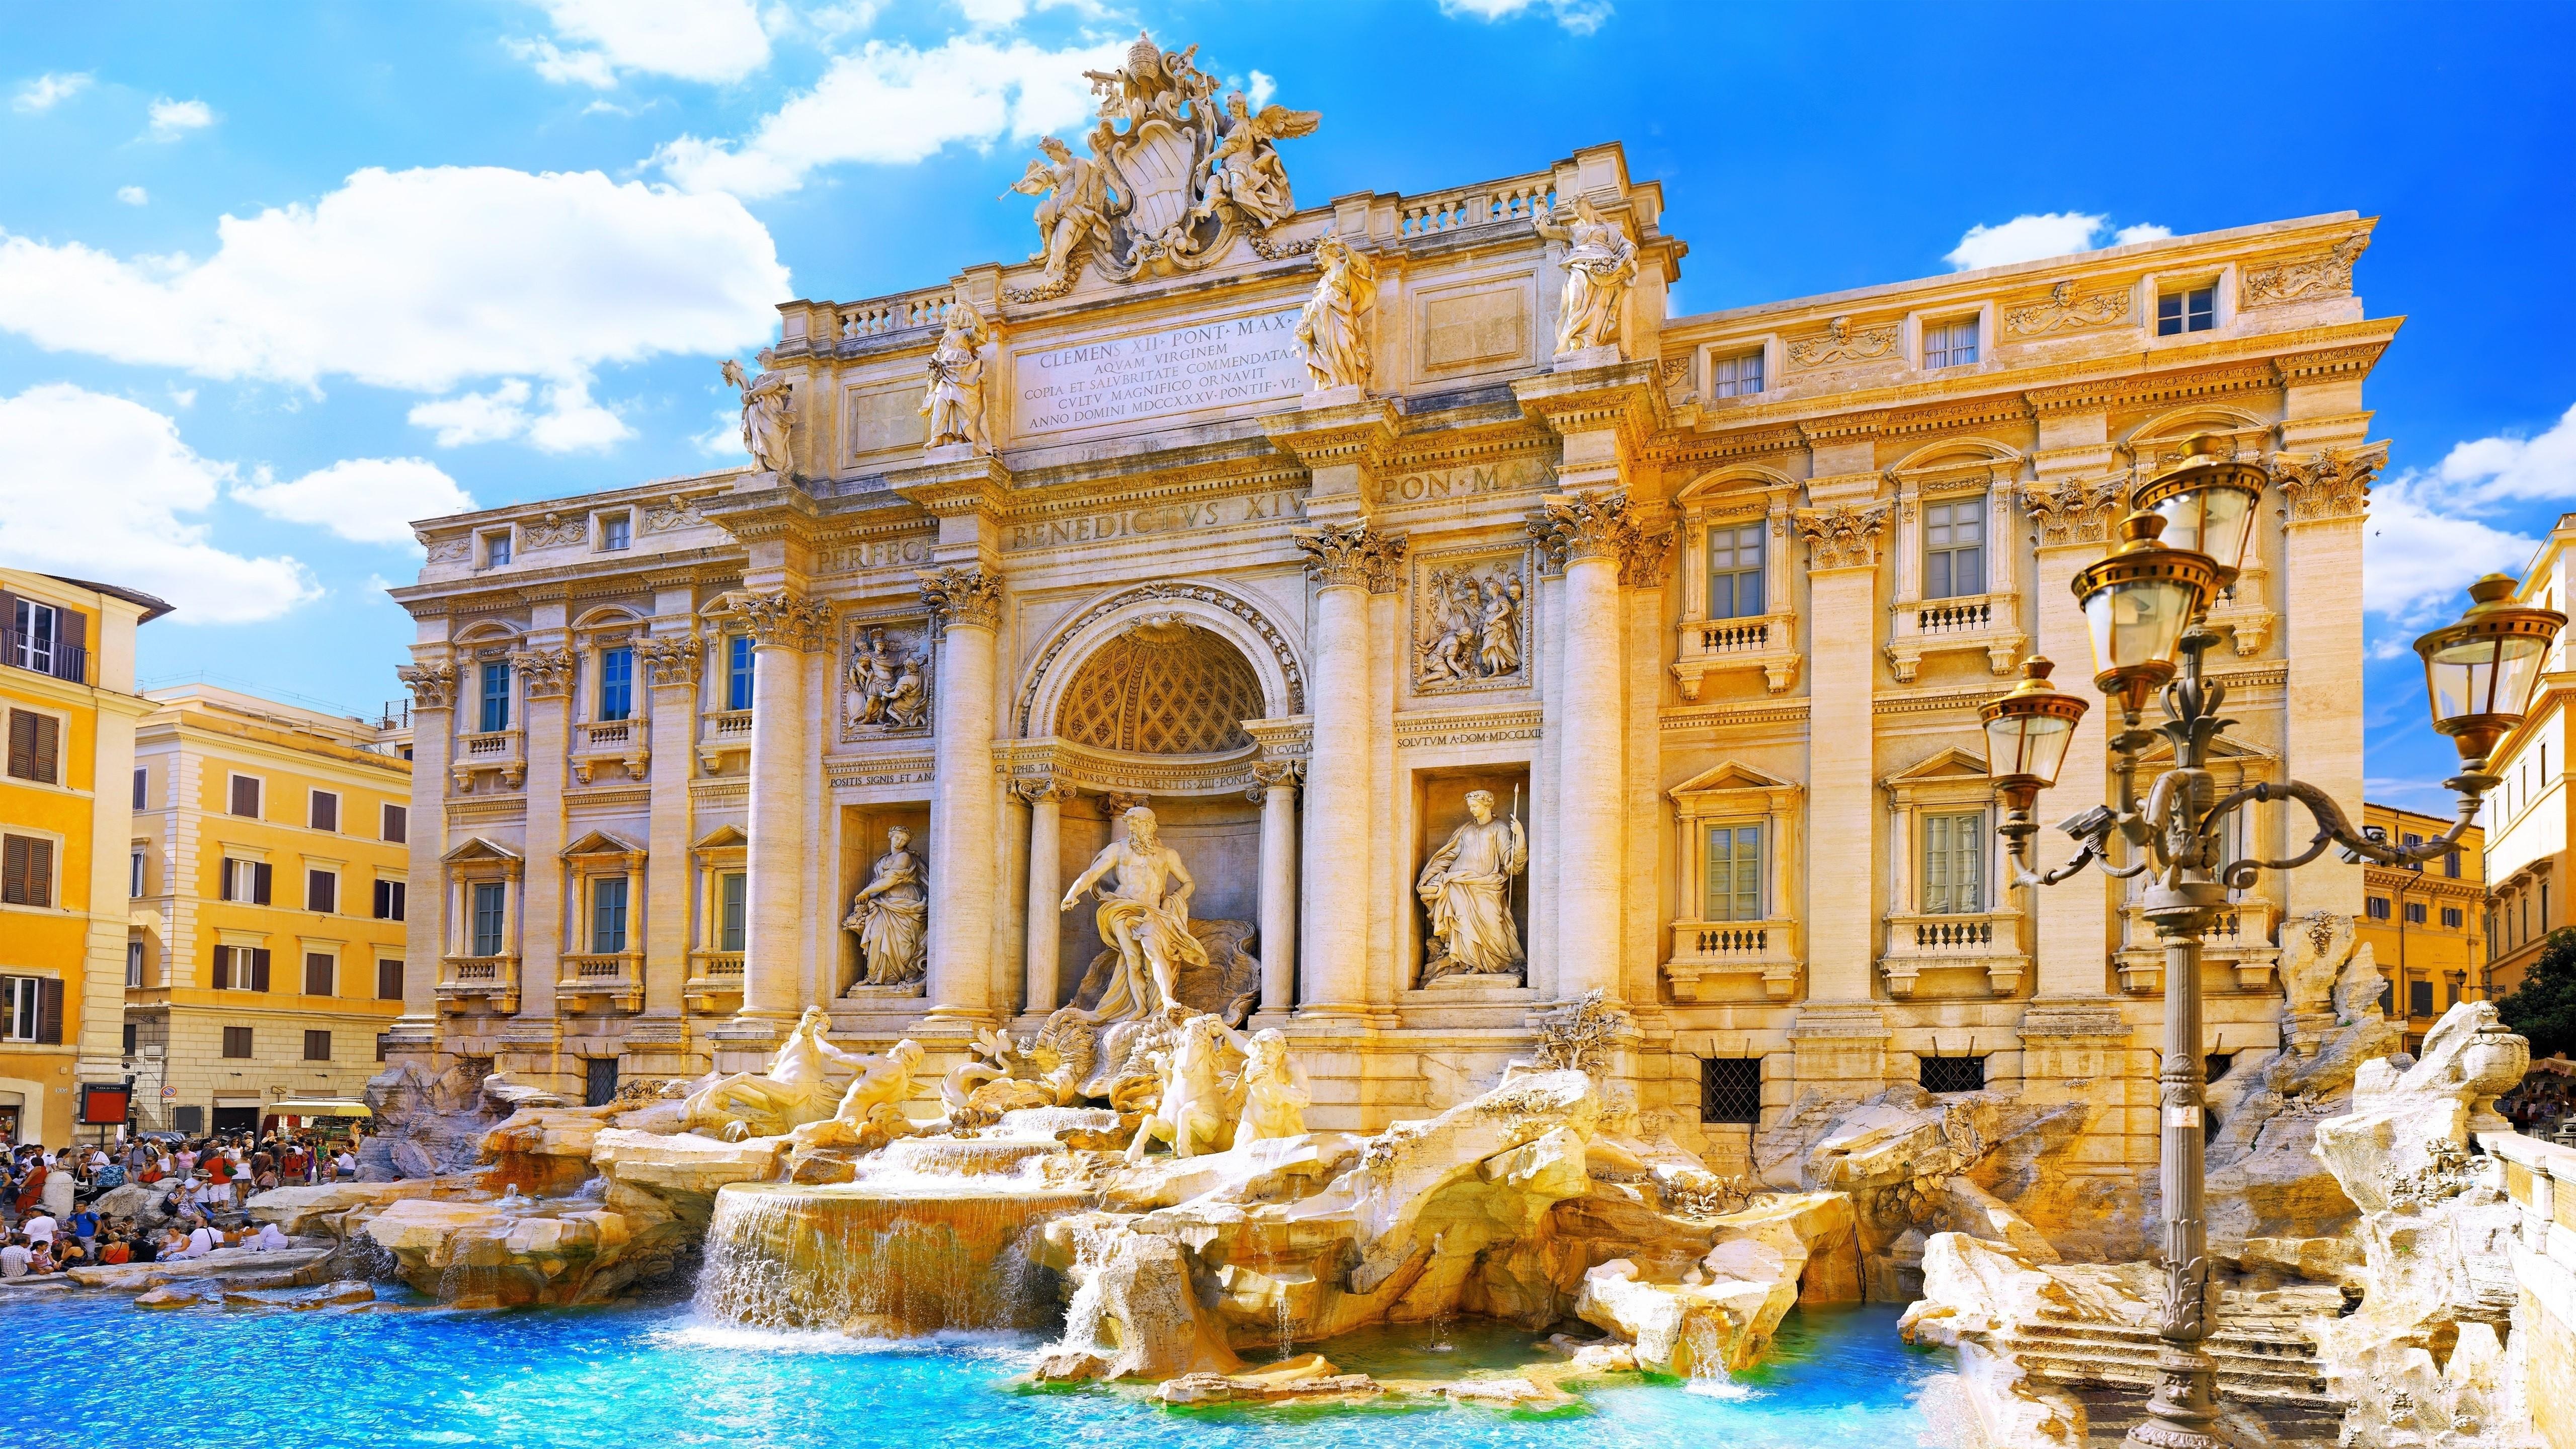 Trevi Fountain in Rome Italy Tourist Place 5K Wallpaper